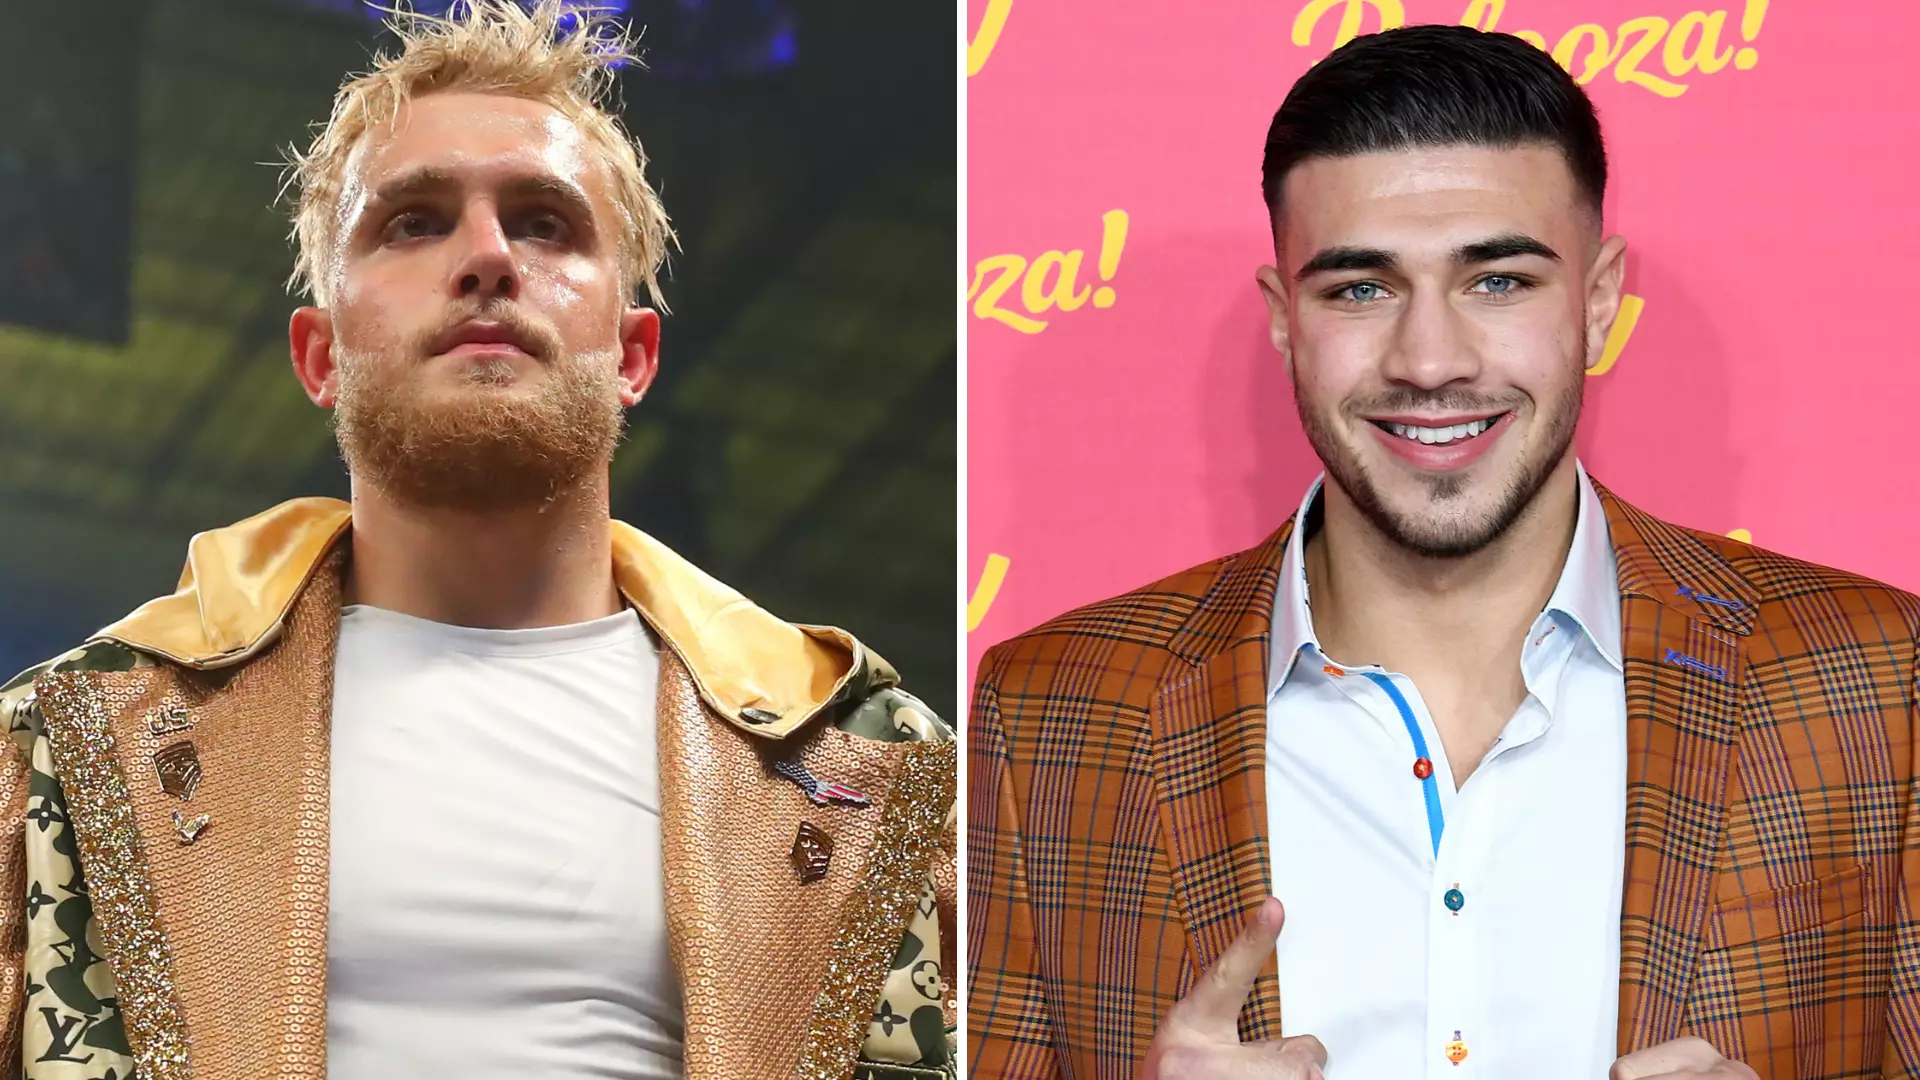 YouTuber Jake Paul Is 'Fighting Better Opponents' Than Boxer Tommy Fury, Says UFC Legend